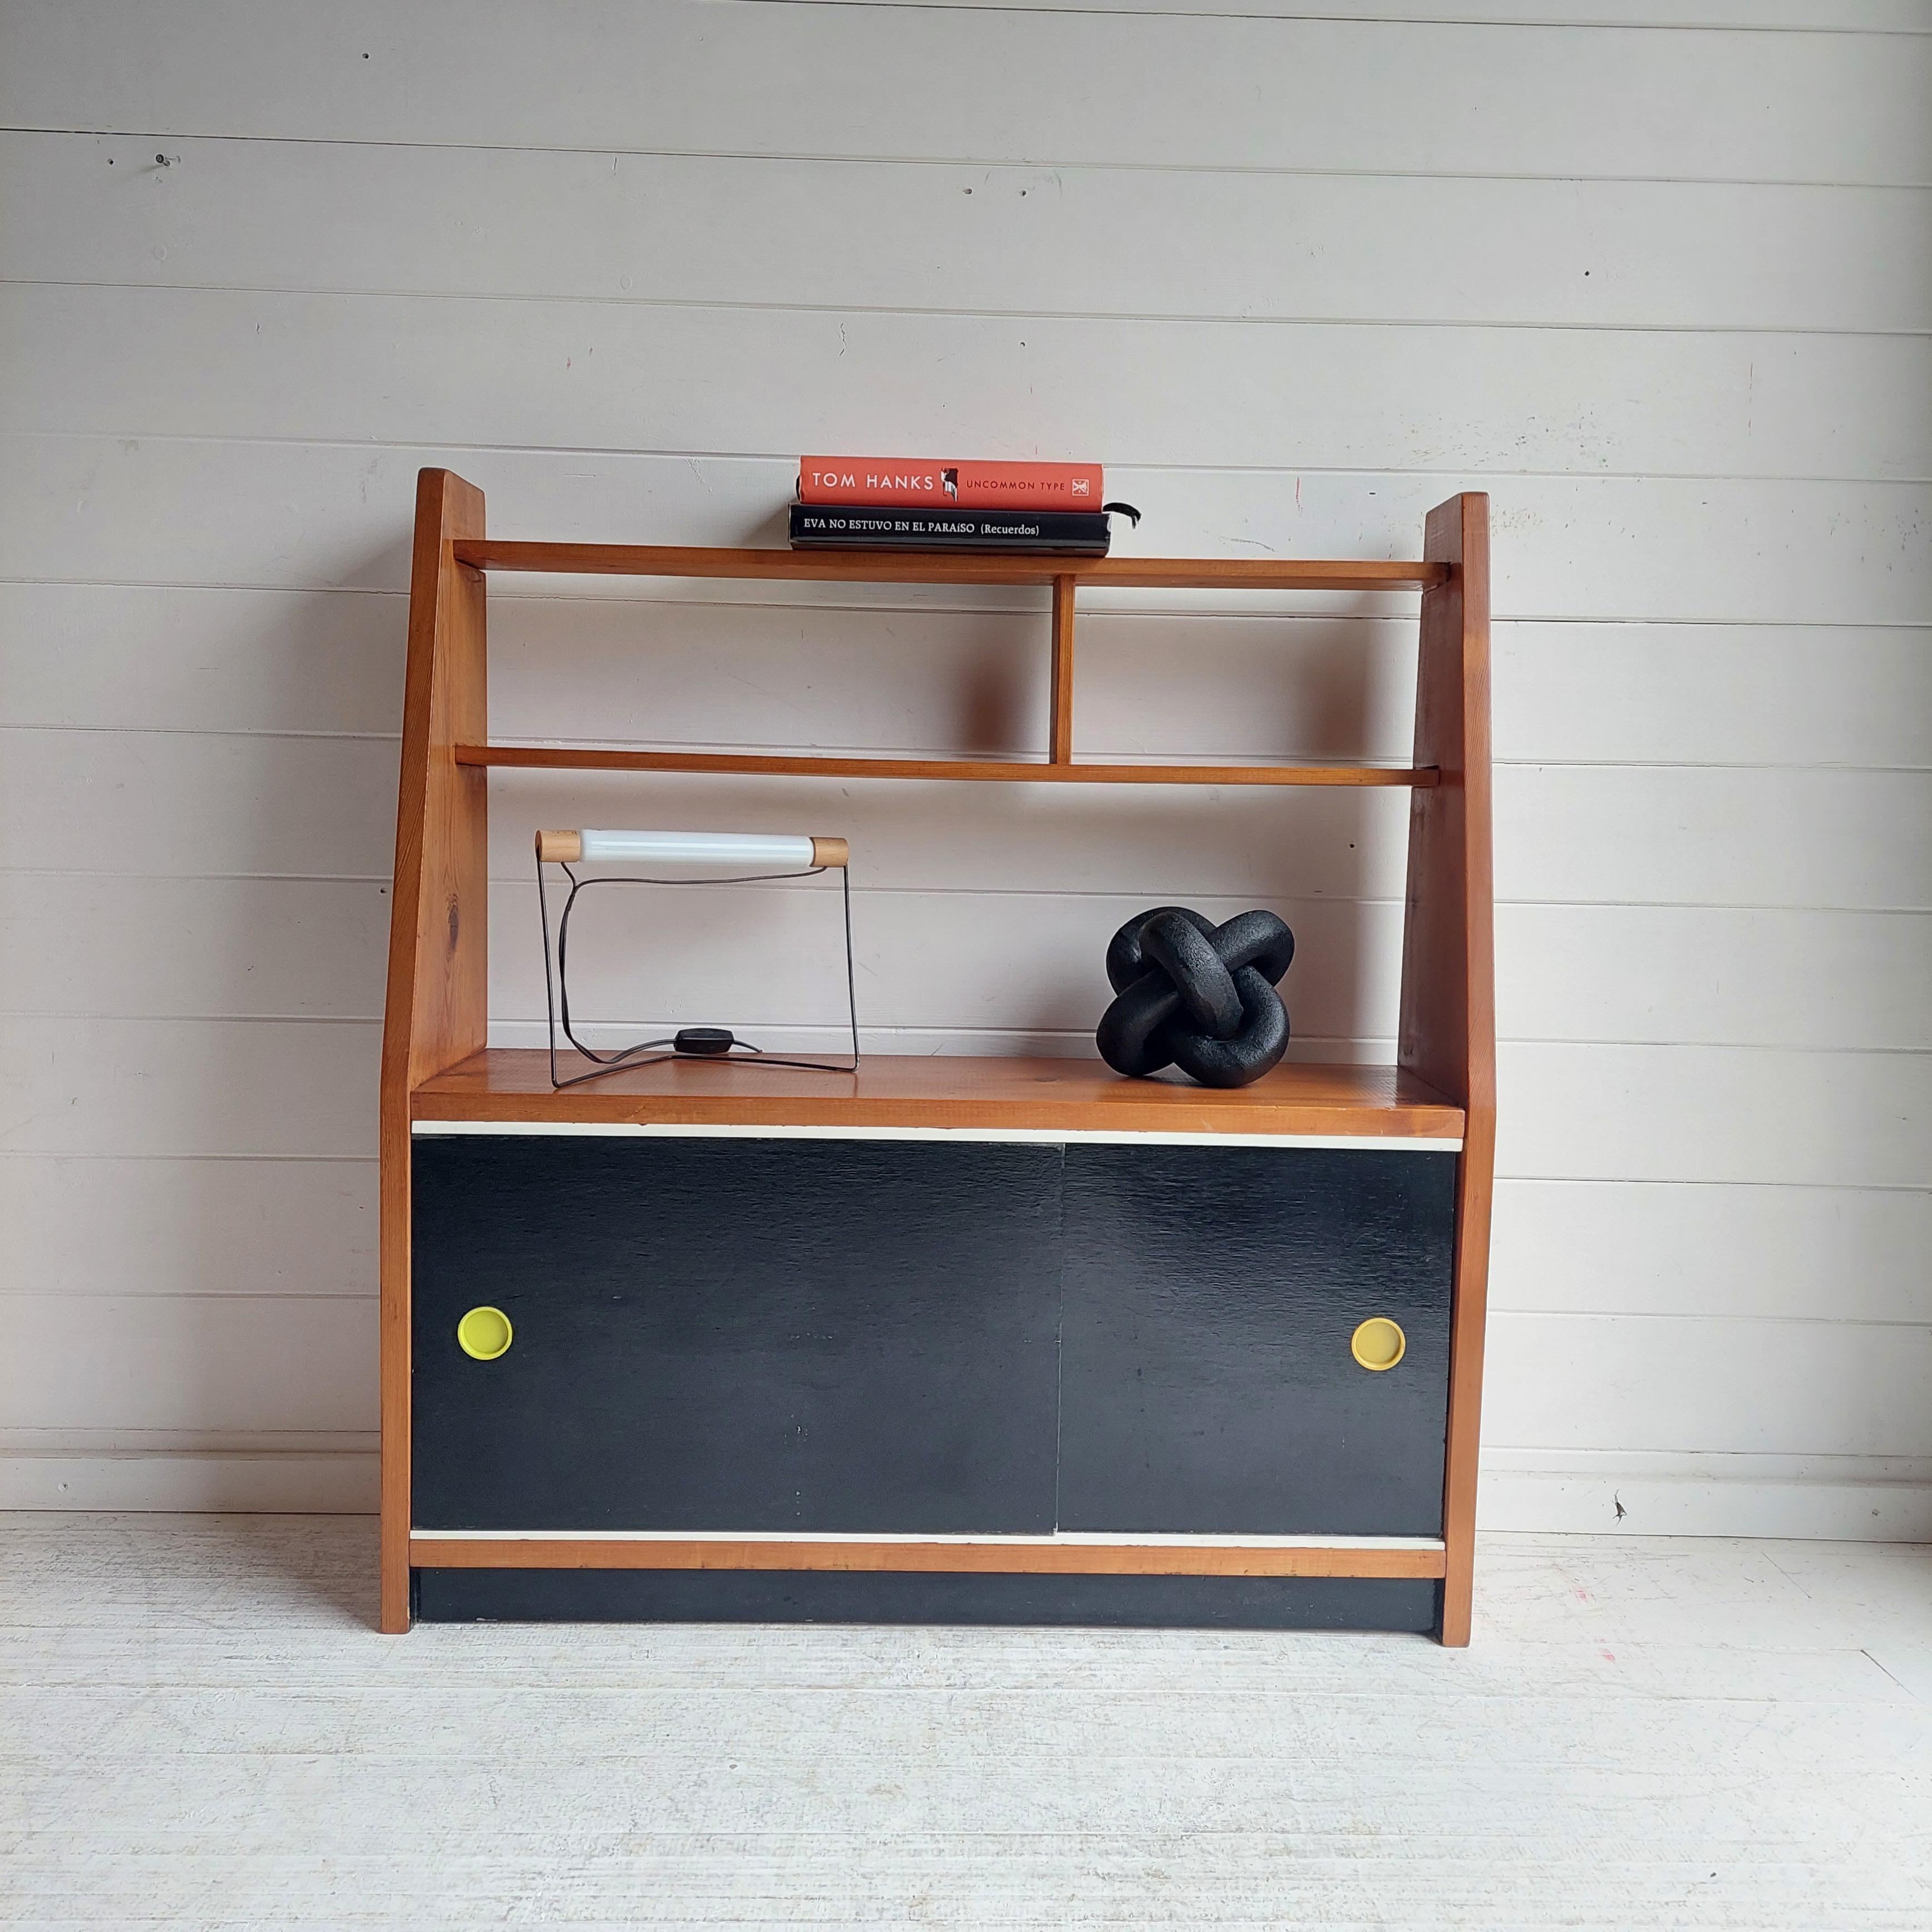 Very stylish and extremely useful compact Danish open bookshelf c1950/60.
A fantastic size that would work well in a bedroom or lounge. 

Designed in the style of Frantisek Jirak for the Czech publisher Tatra Nabytok. 
It was most probably produced